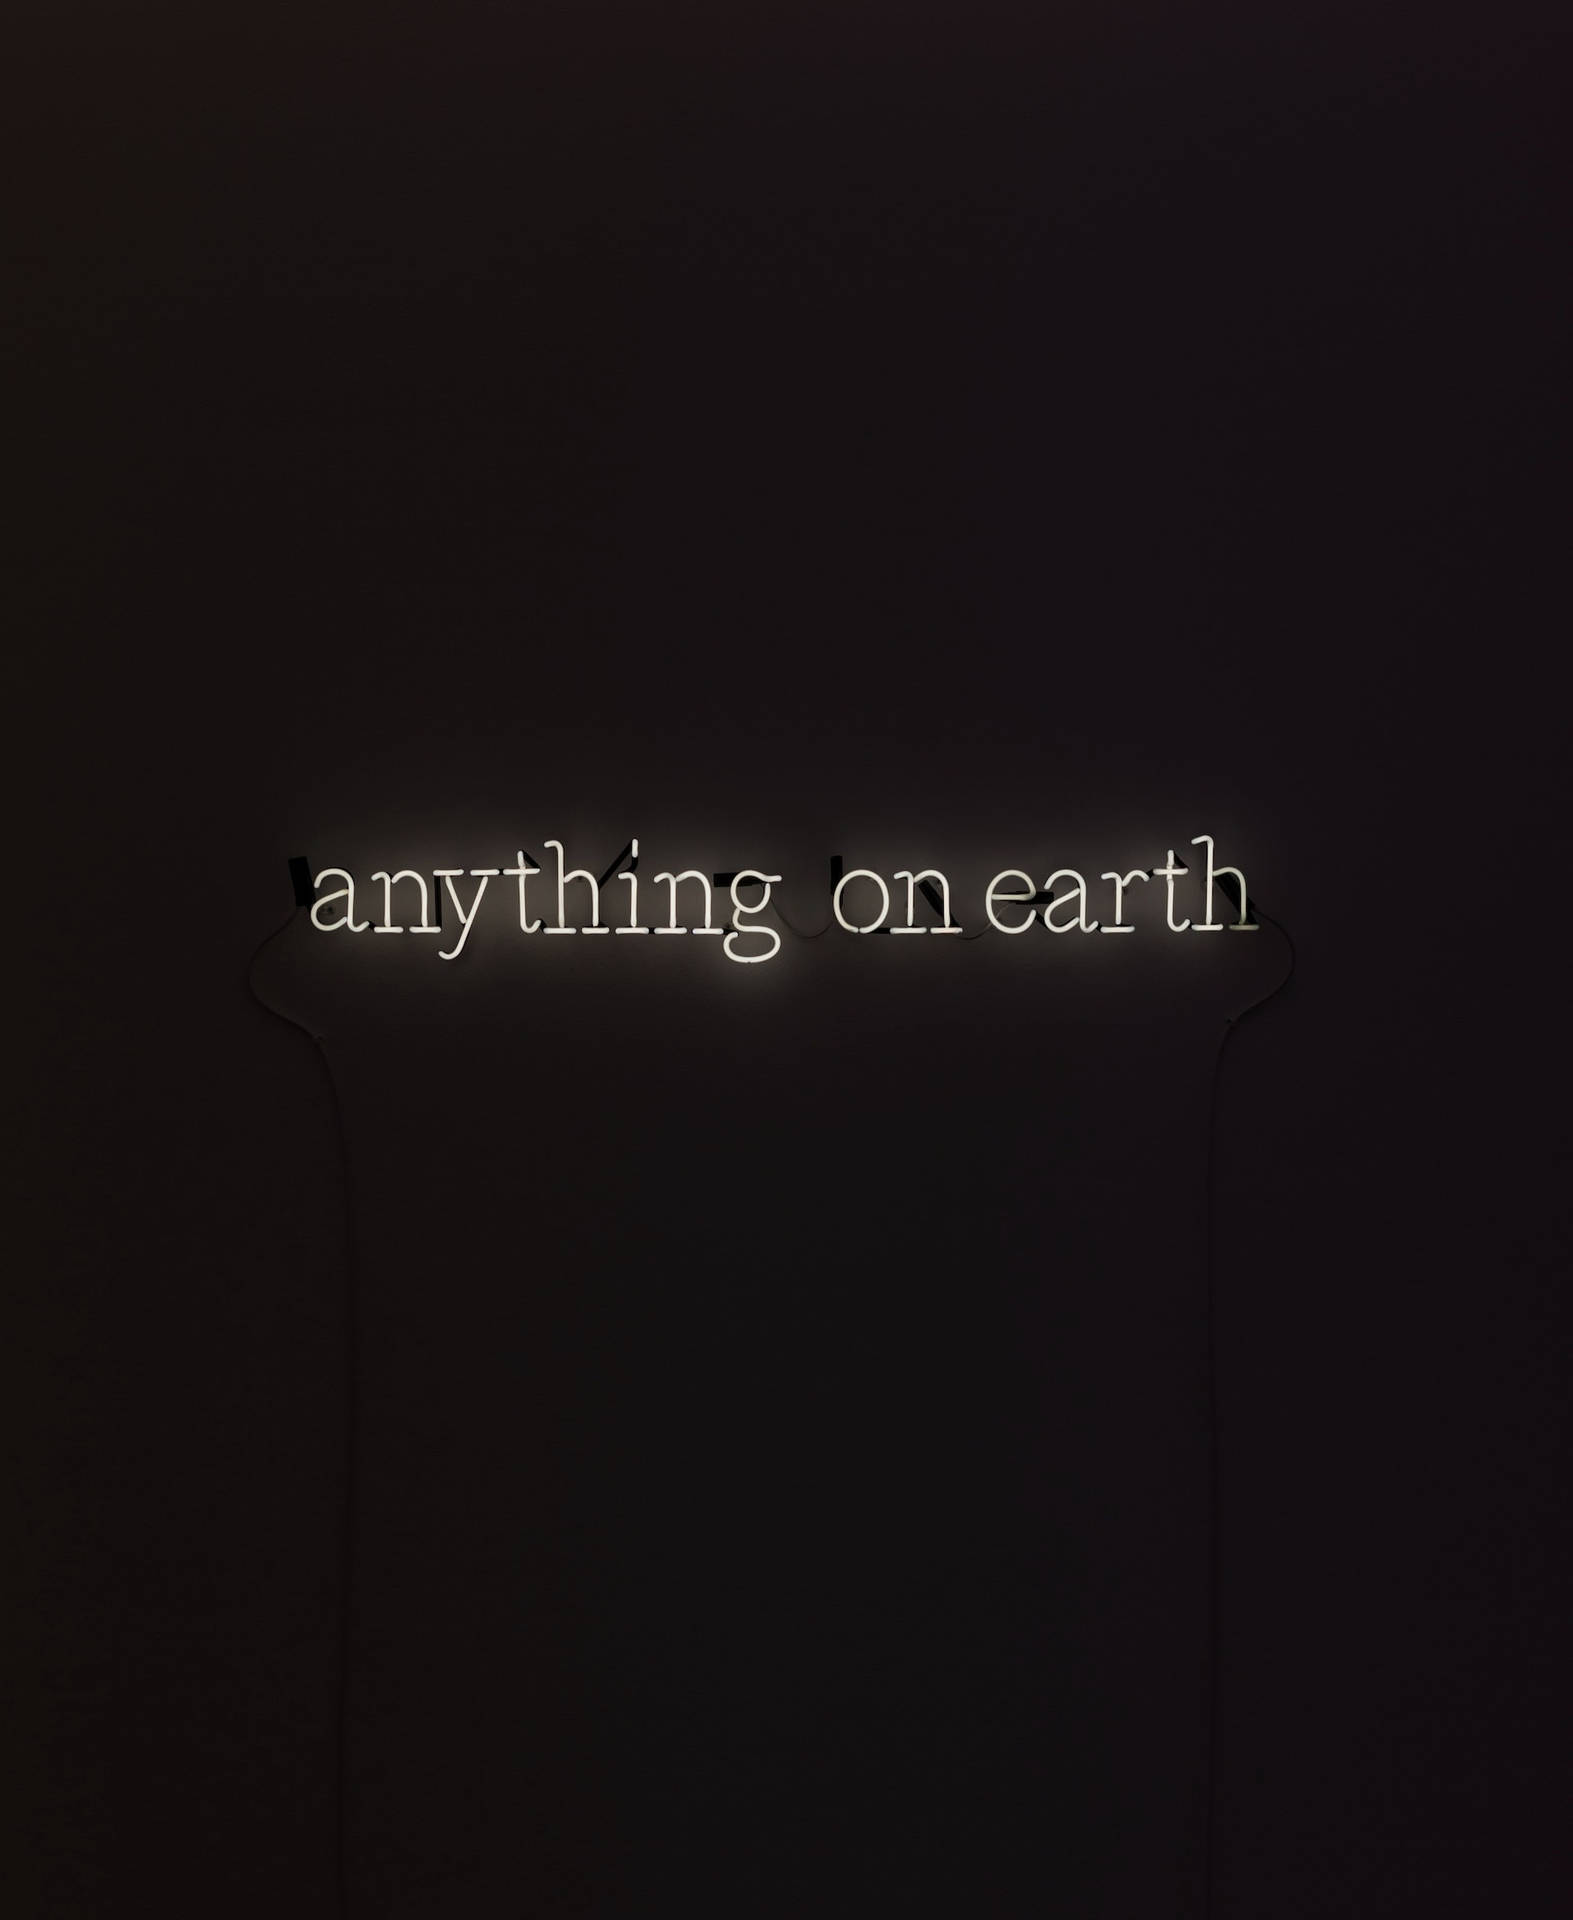 Anything On Earth Black Phone Background